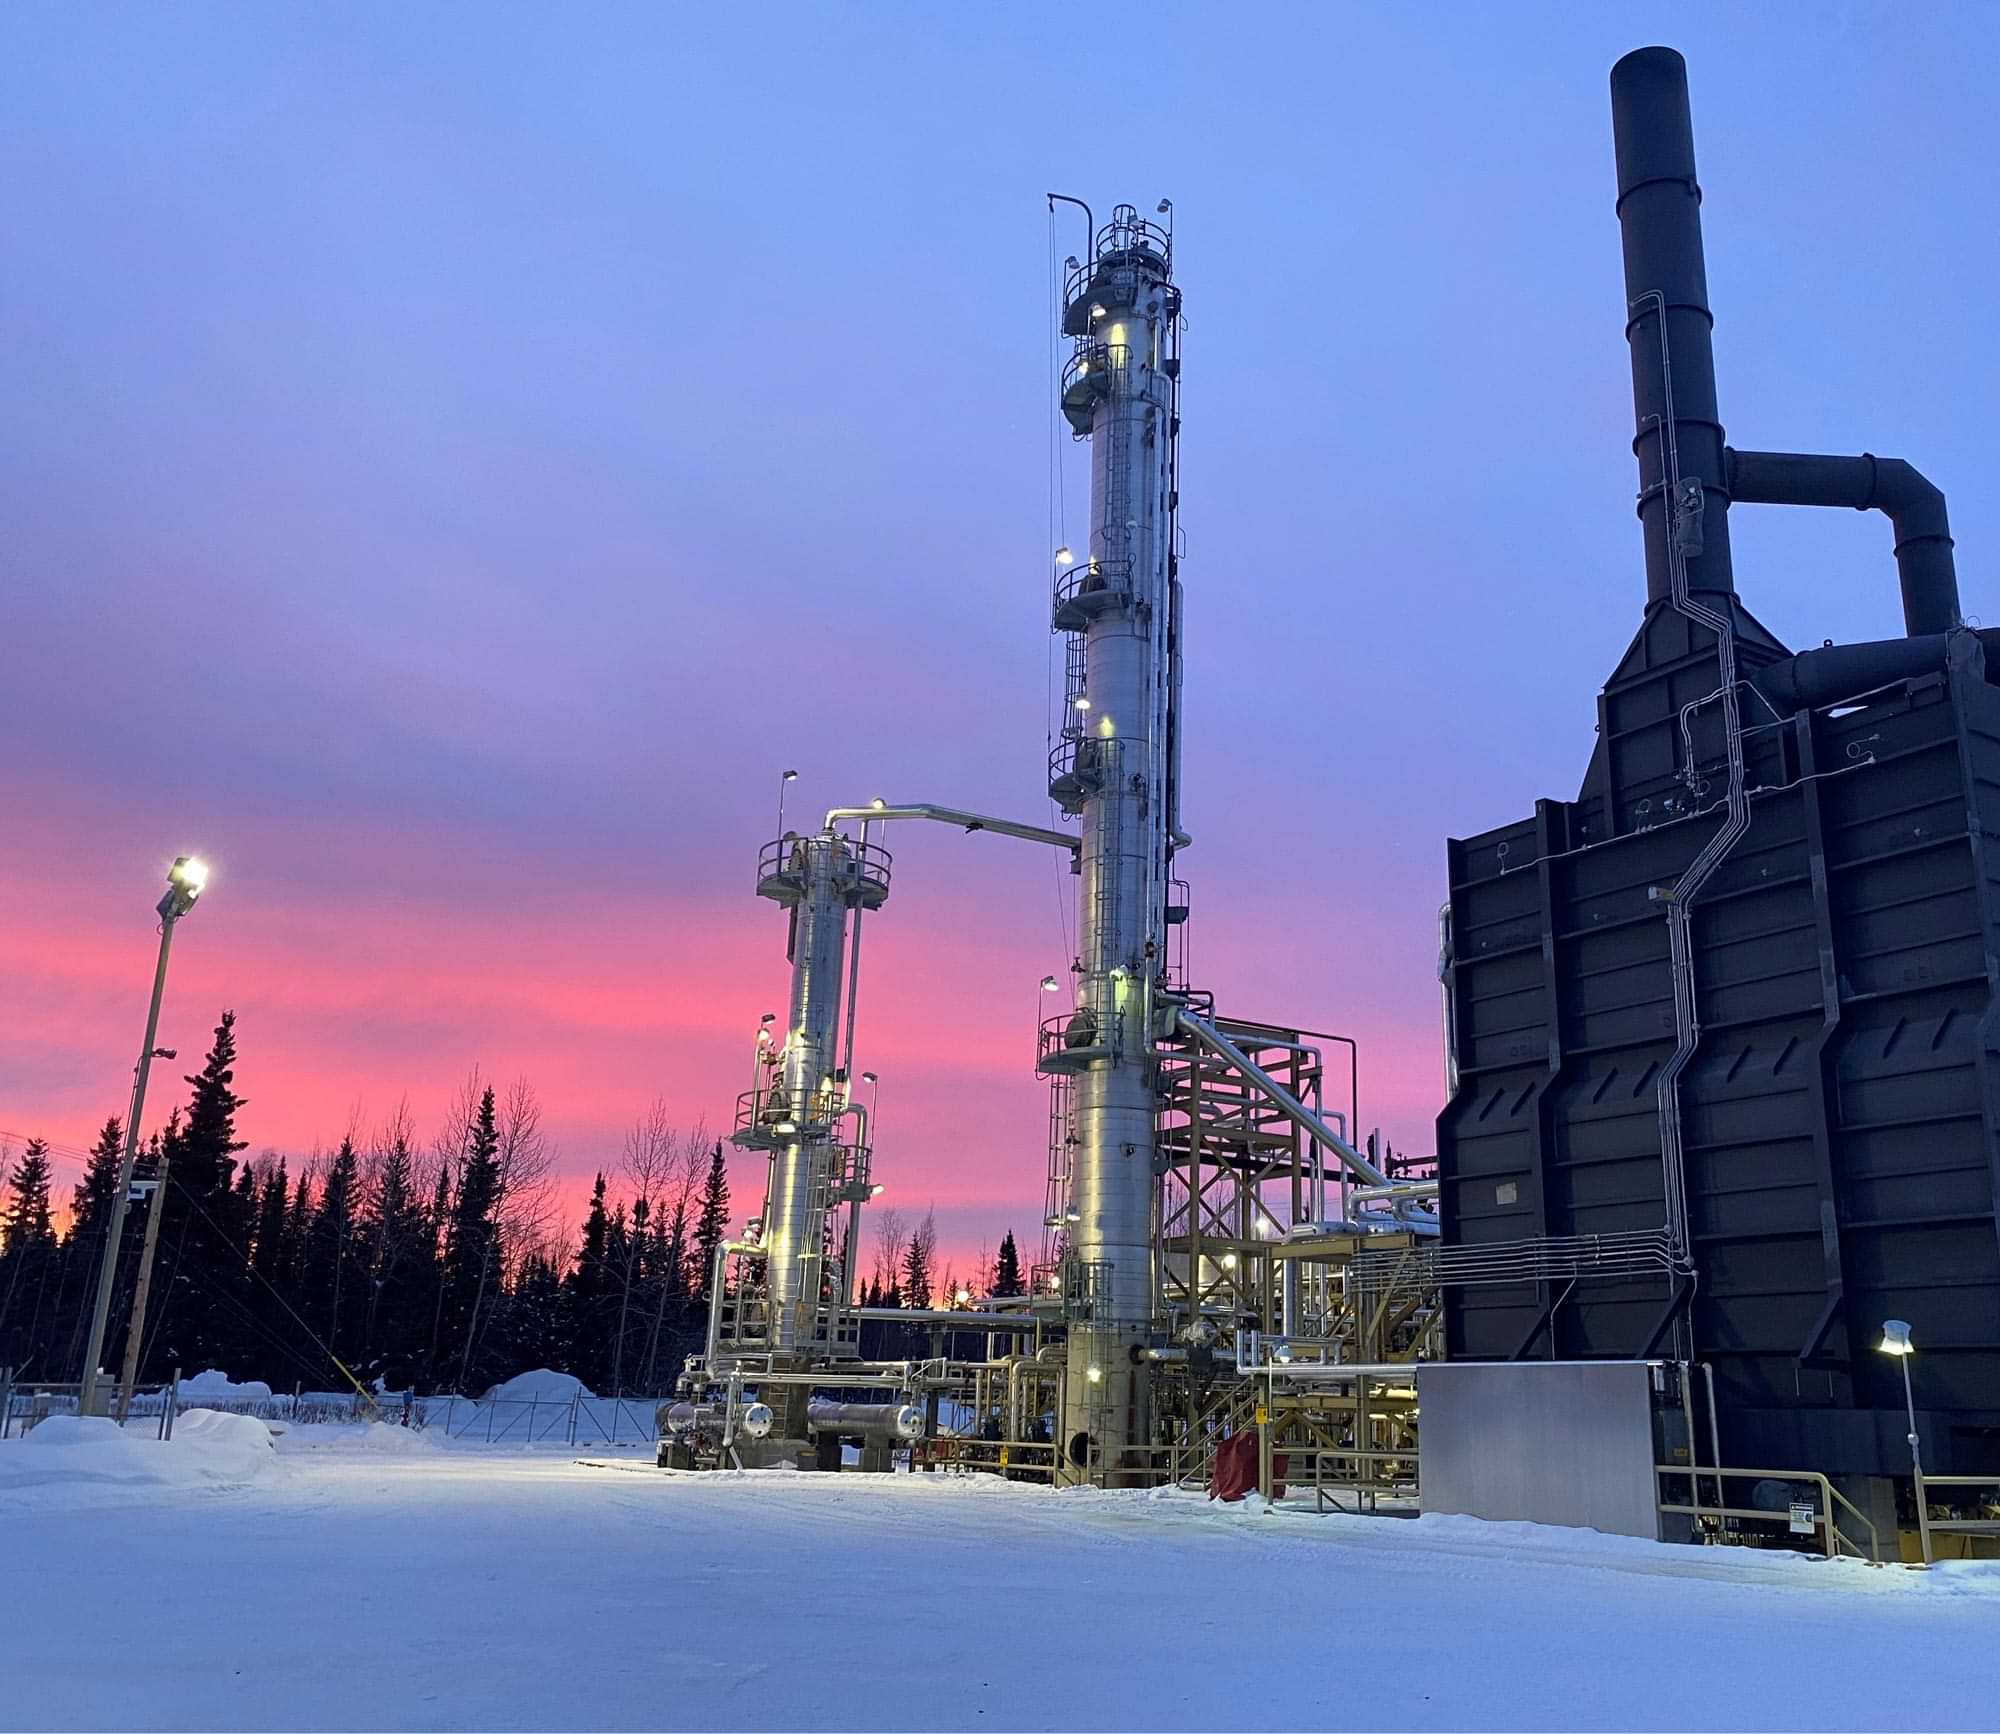 the North Pole Refinery Crude Unit against a pink and blue sky